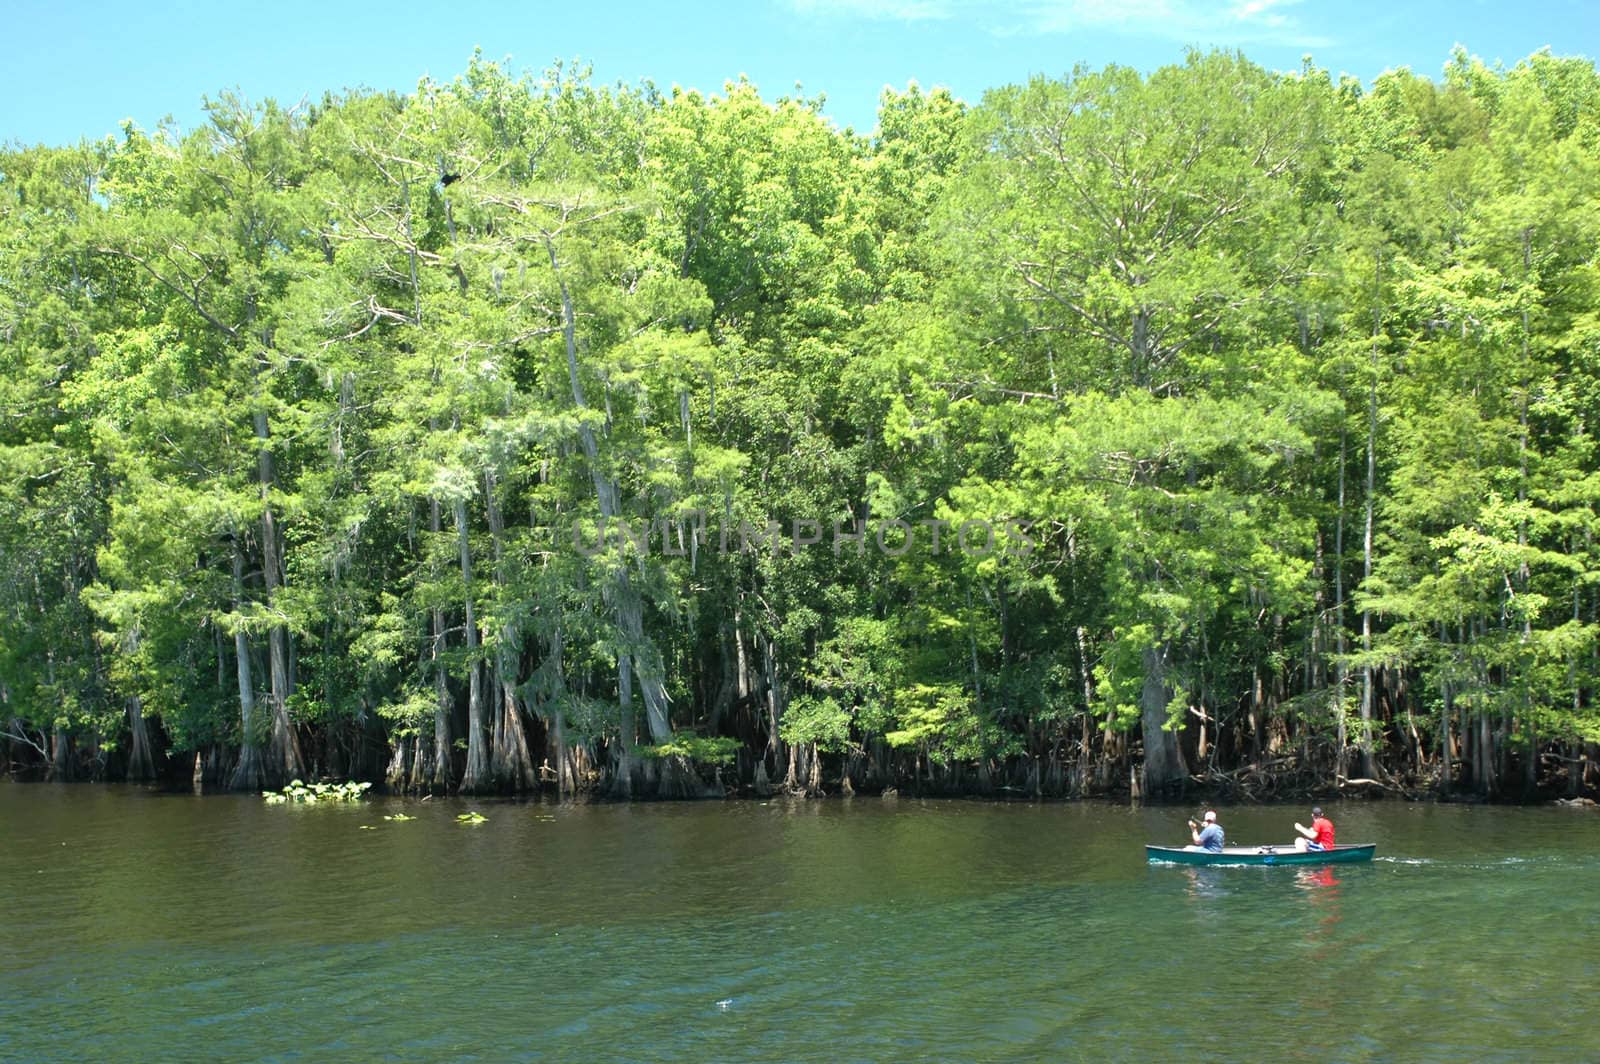 Canoeists paddle down the Suwannee River.